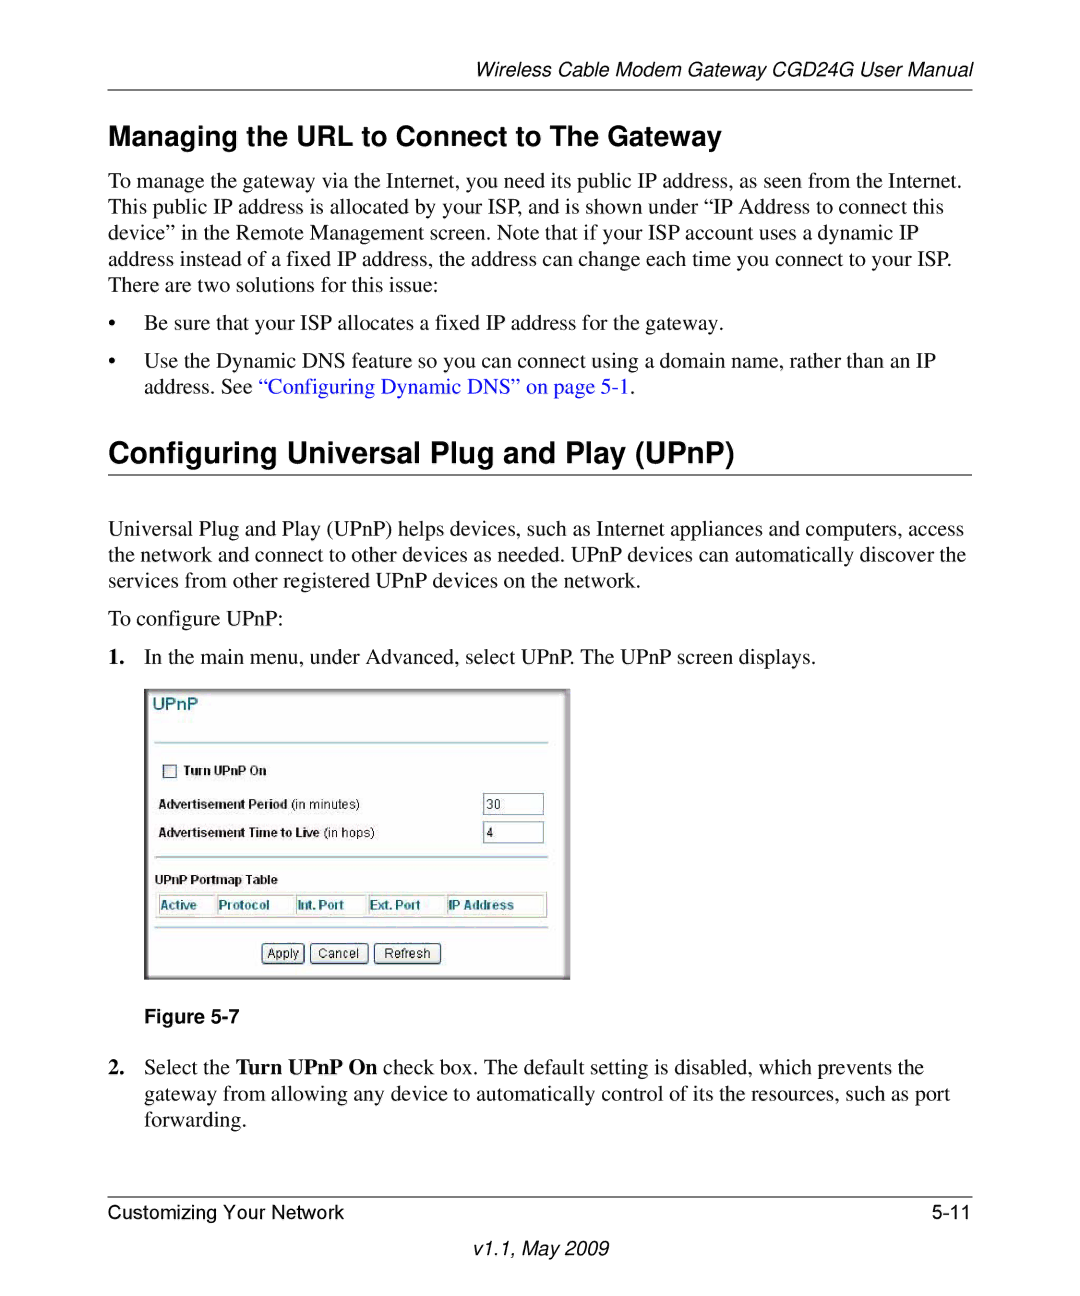 Gateway CGD24G user manual Configuring Universal Plug and Play UPnP, Managing the URL to Connect to The Gateway 